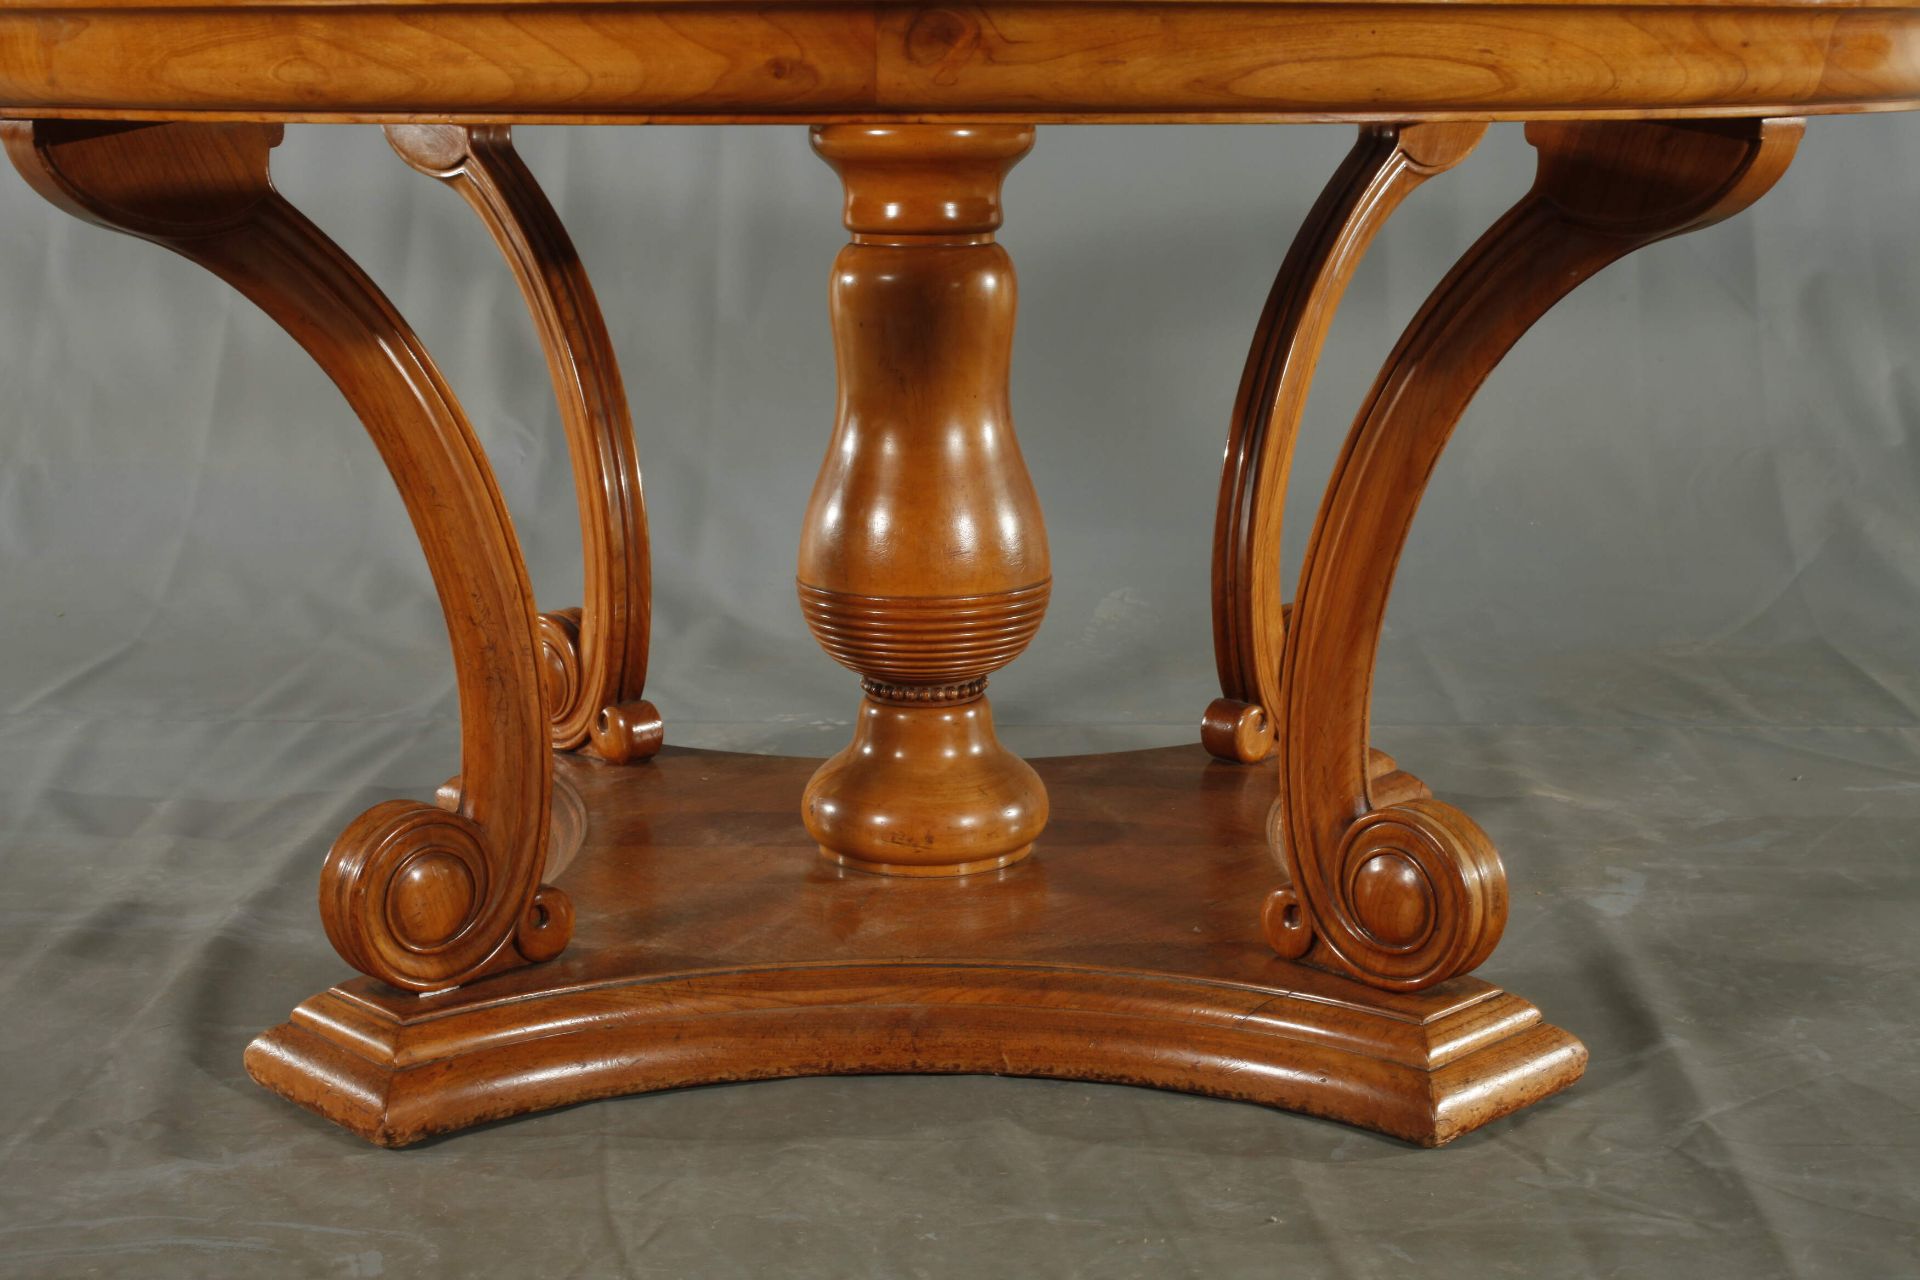 Large Art Nouveau dining table - Image 4 of 5